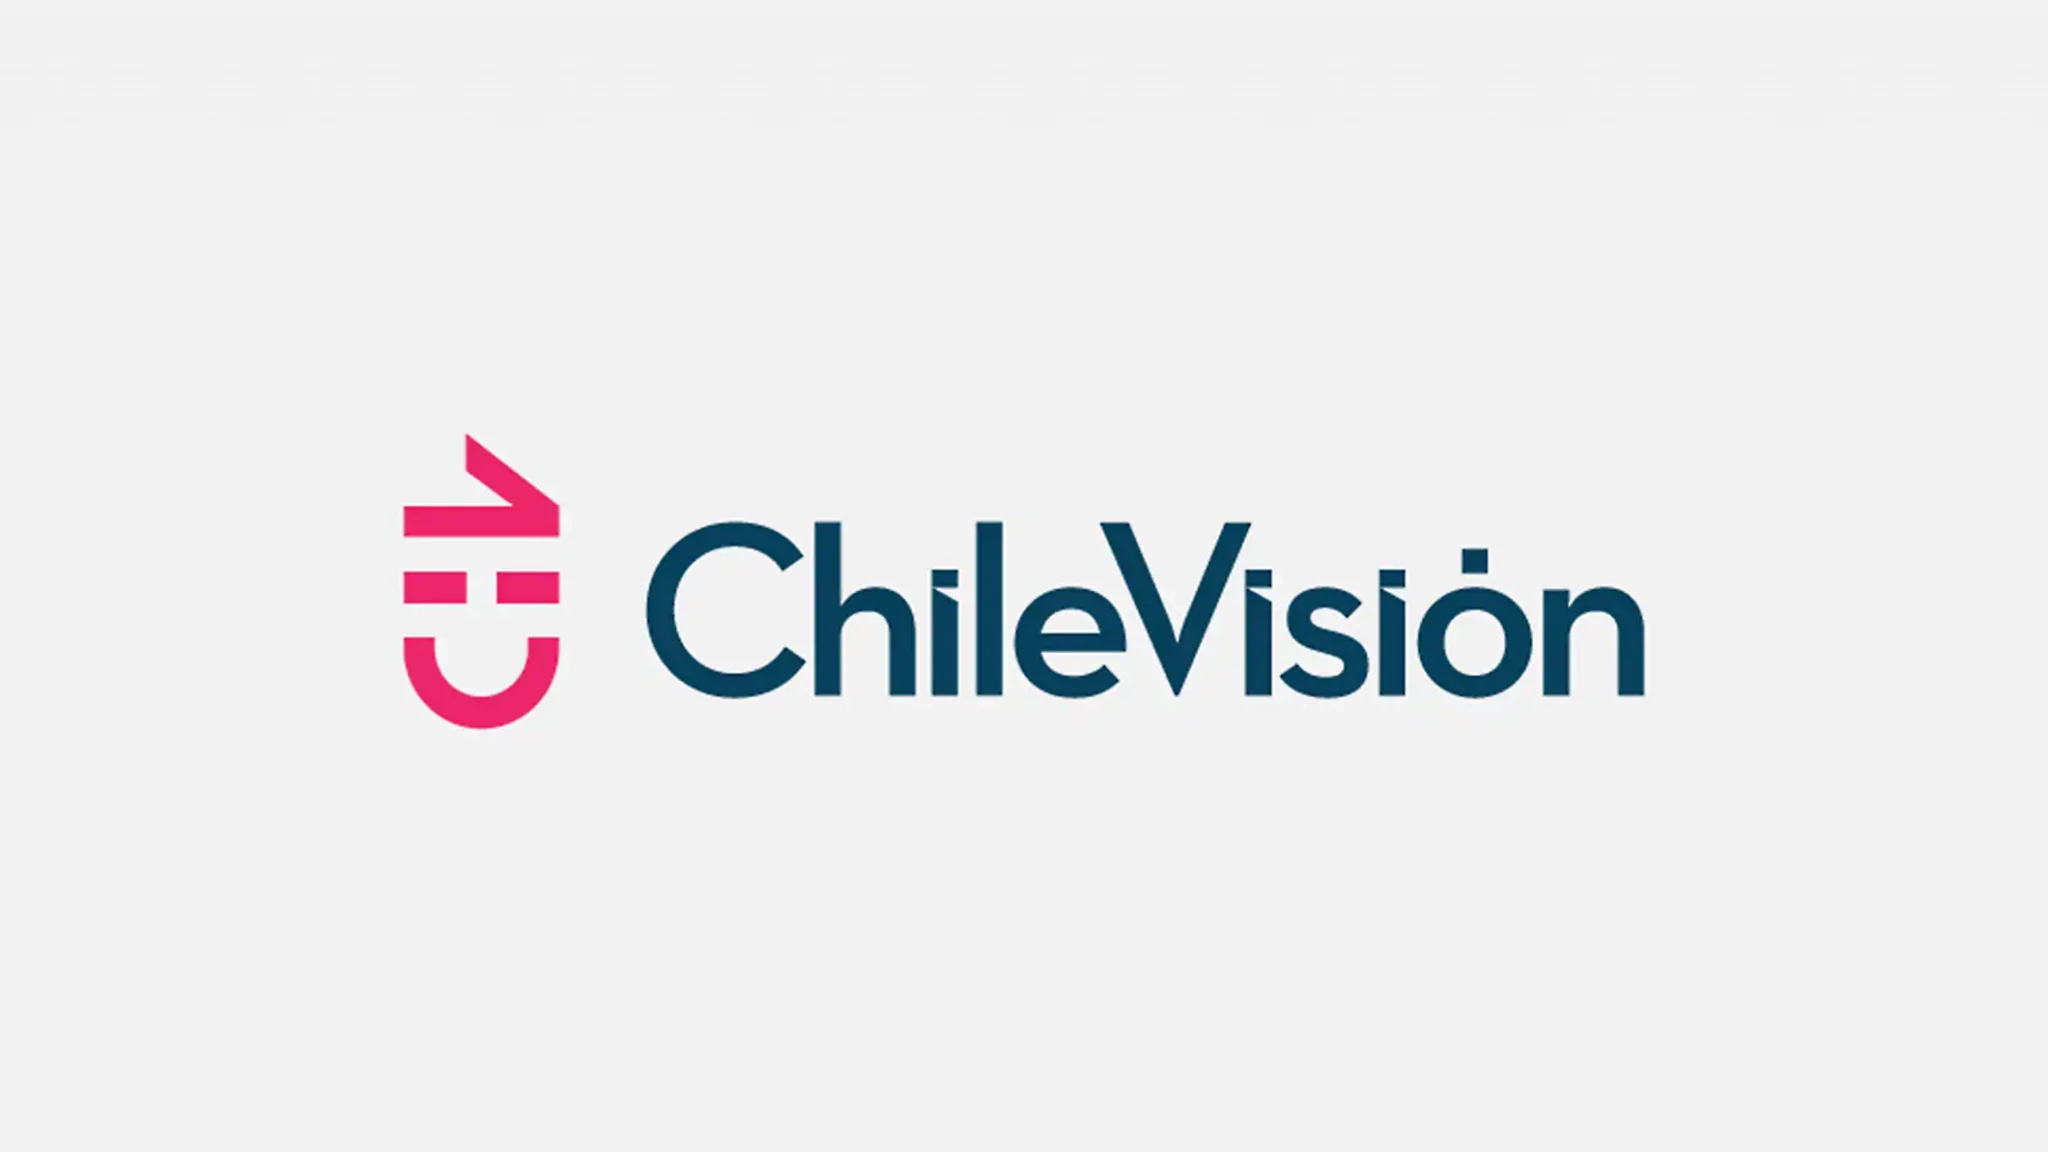 Chilevisión will have the broadcasting rights for the Paris 2024 Olympics ©ChileVision